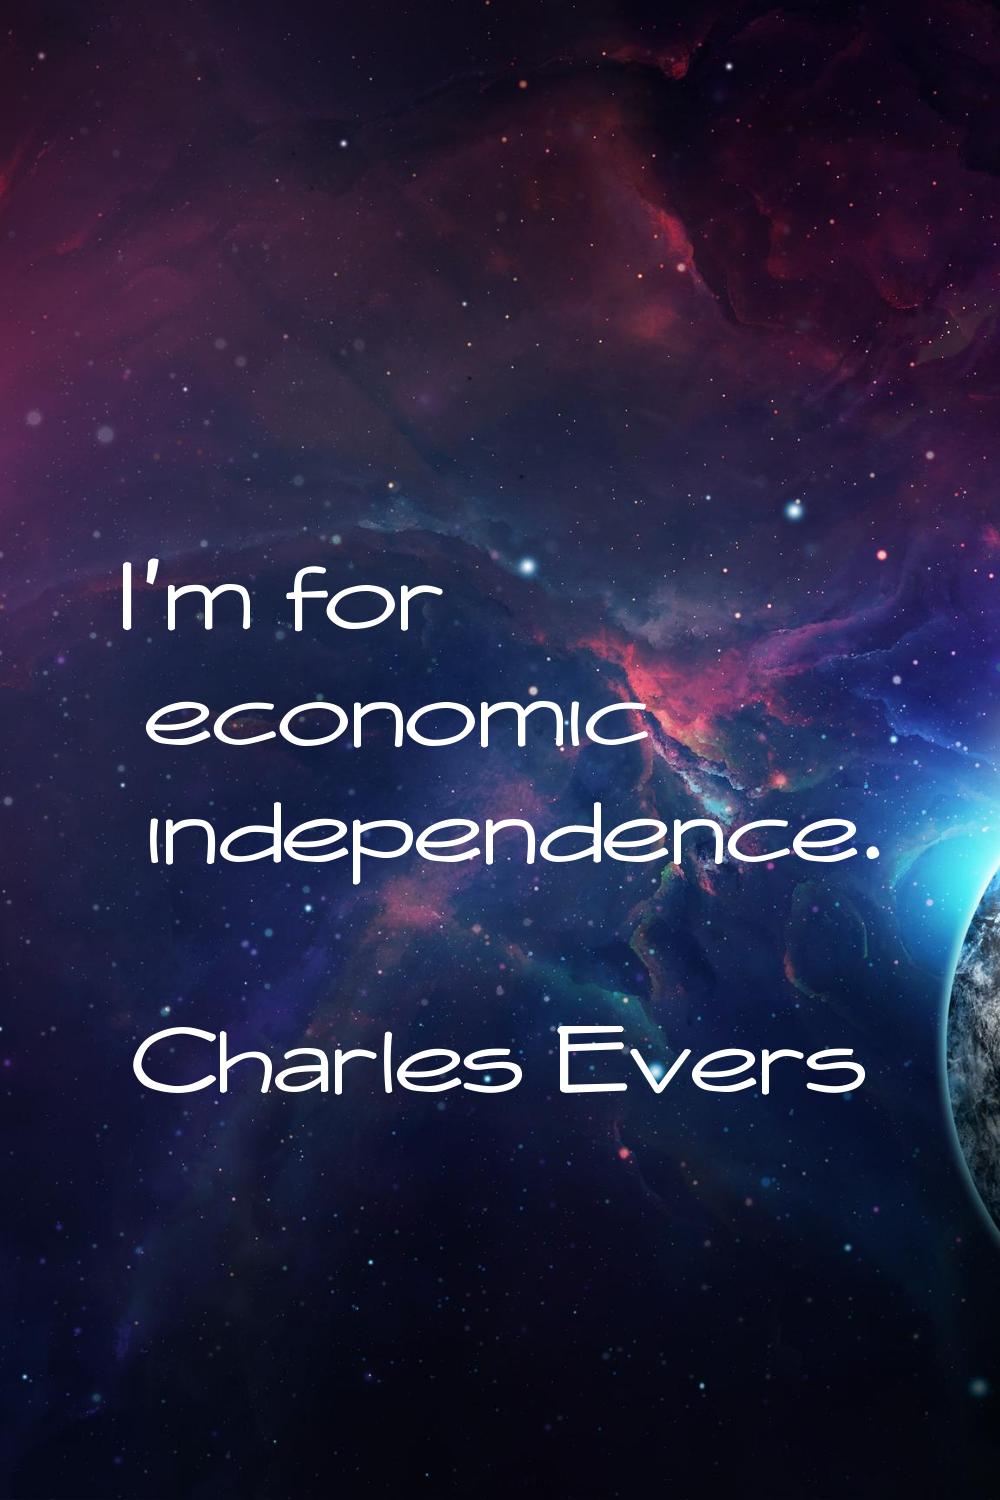 I'm for economic independence.